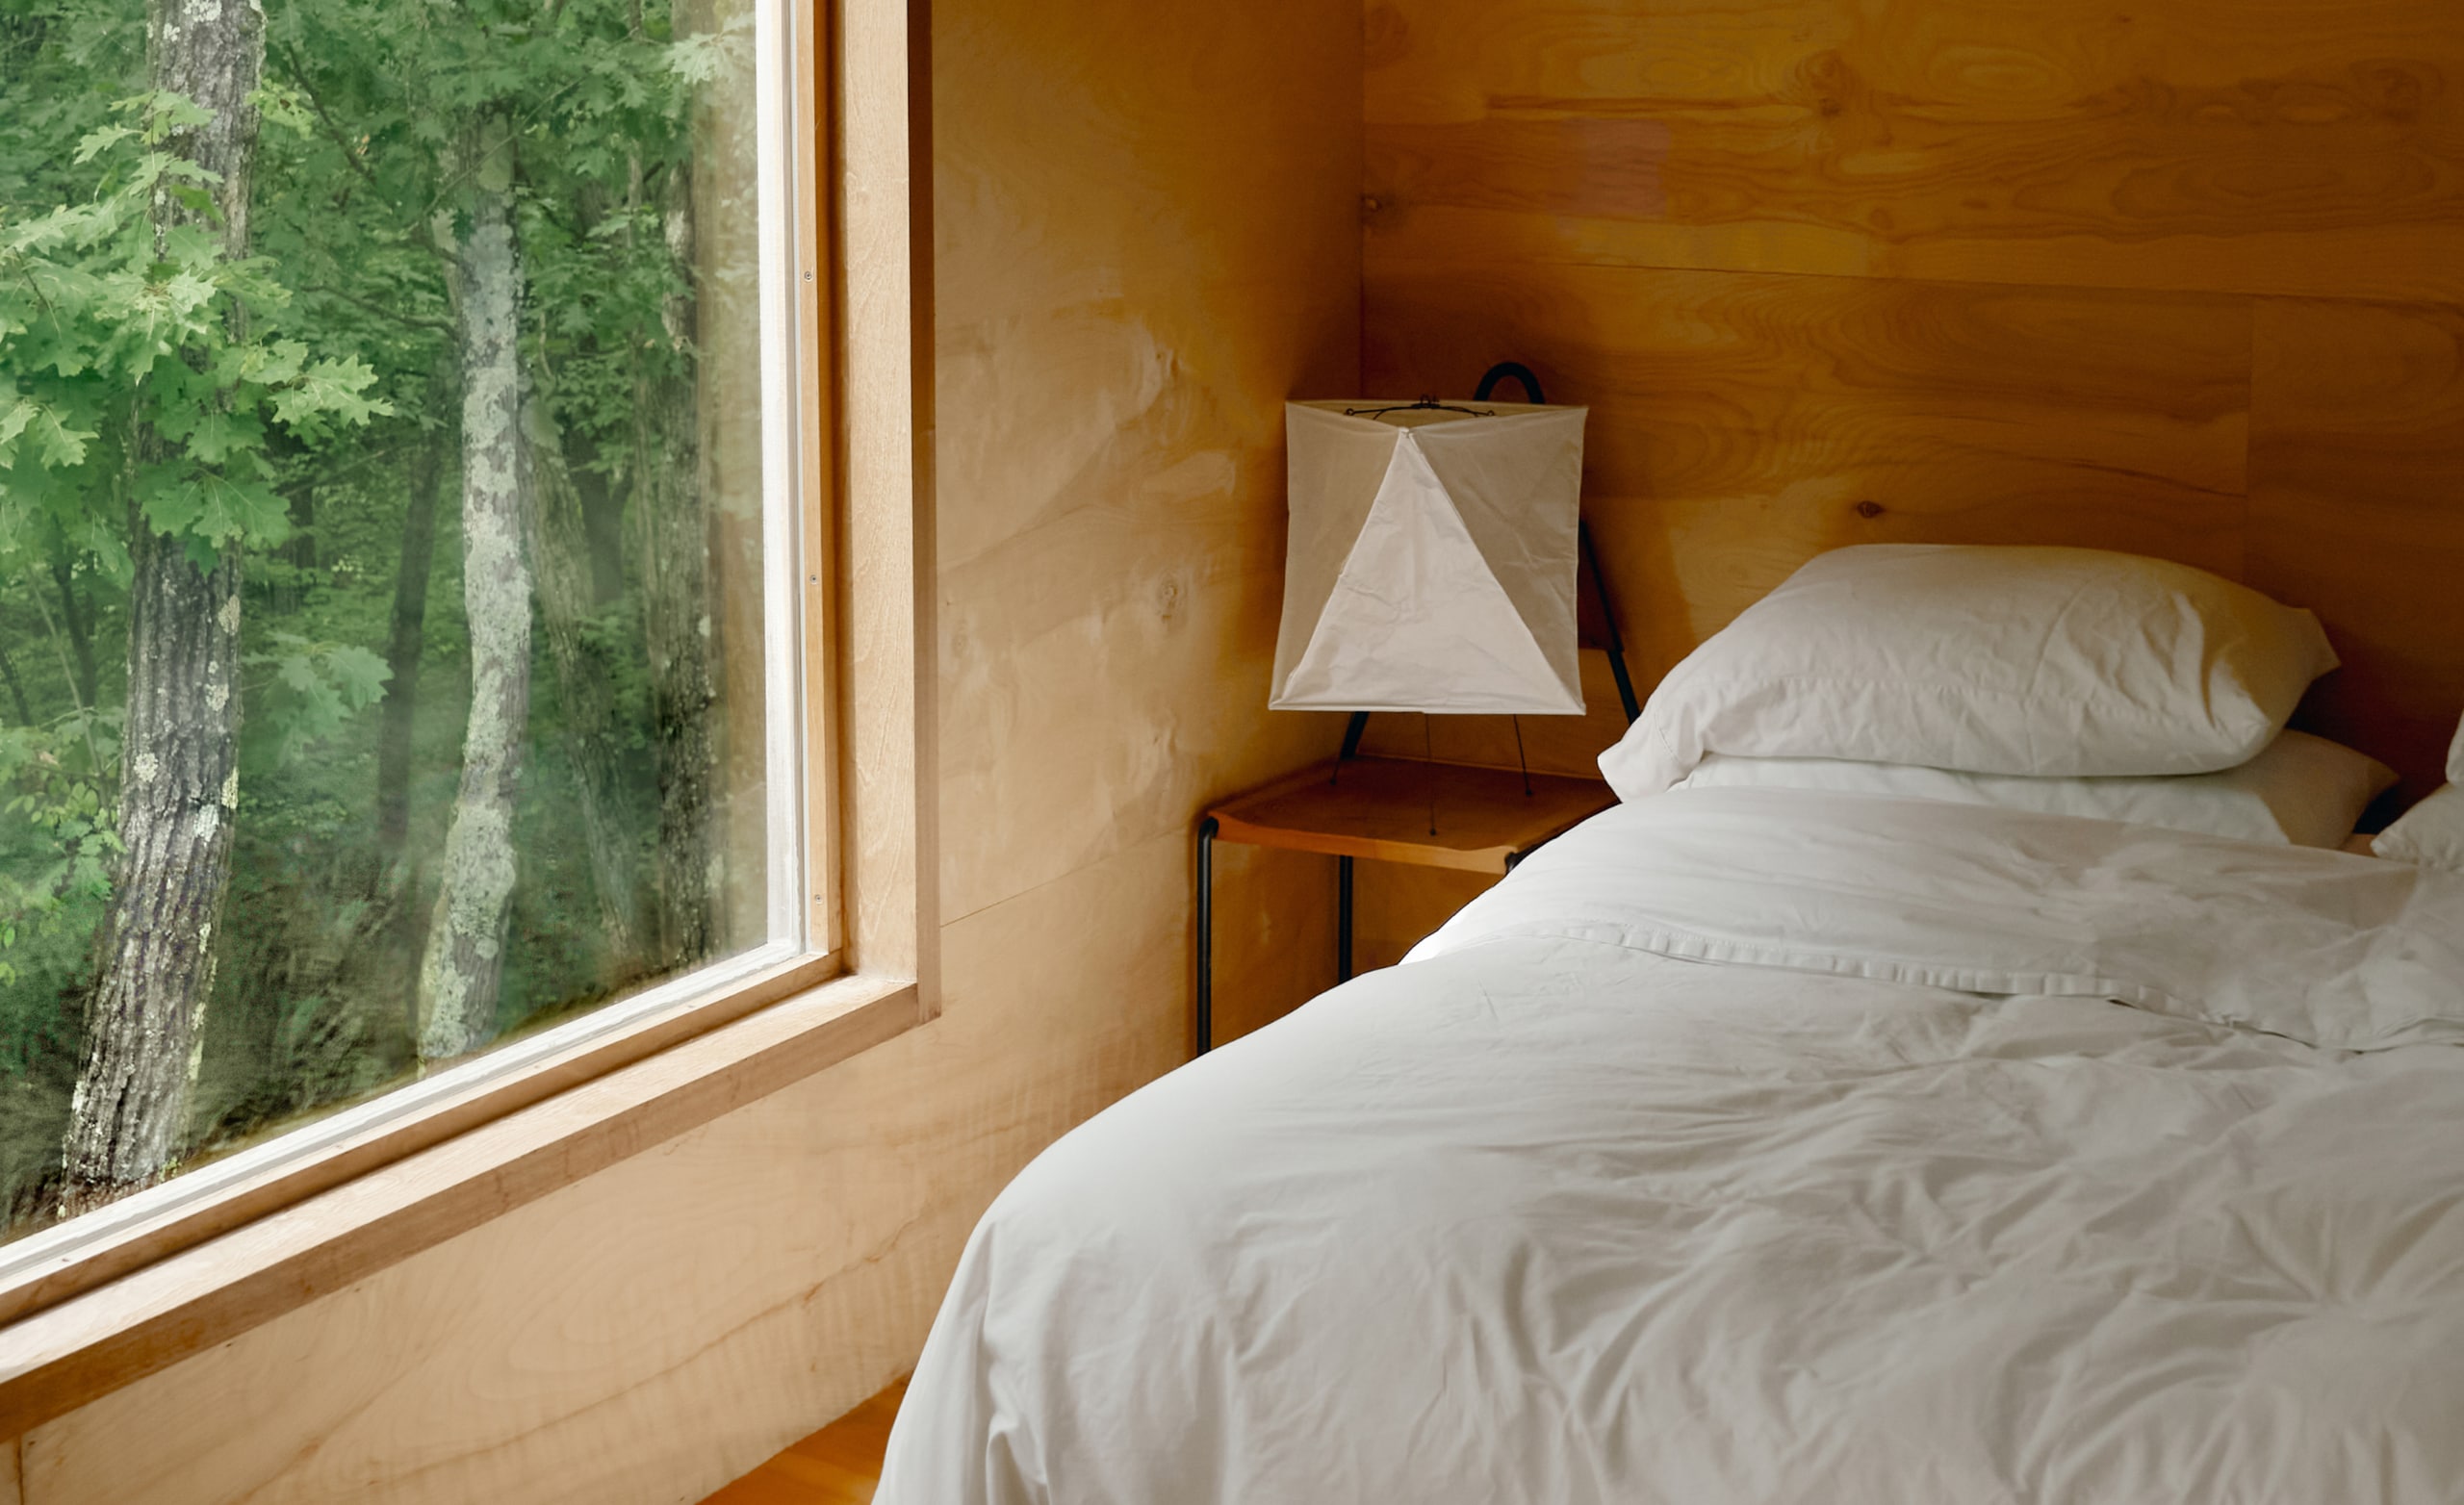 A bedroom with white sheets on a freshly made bed, and a large window showing trees outside.